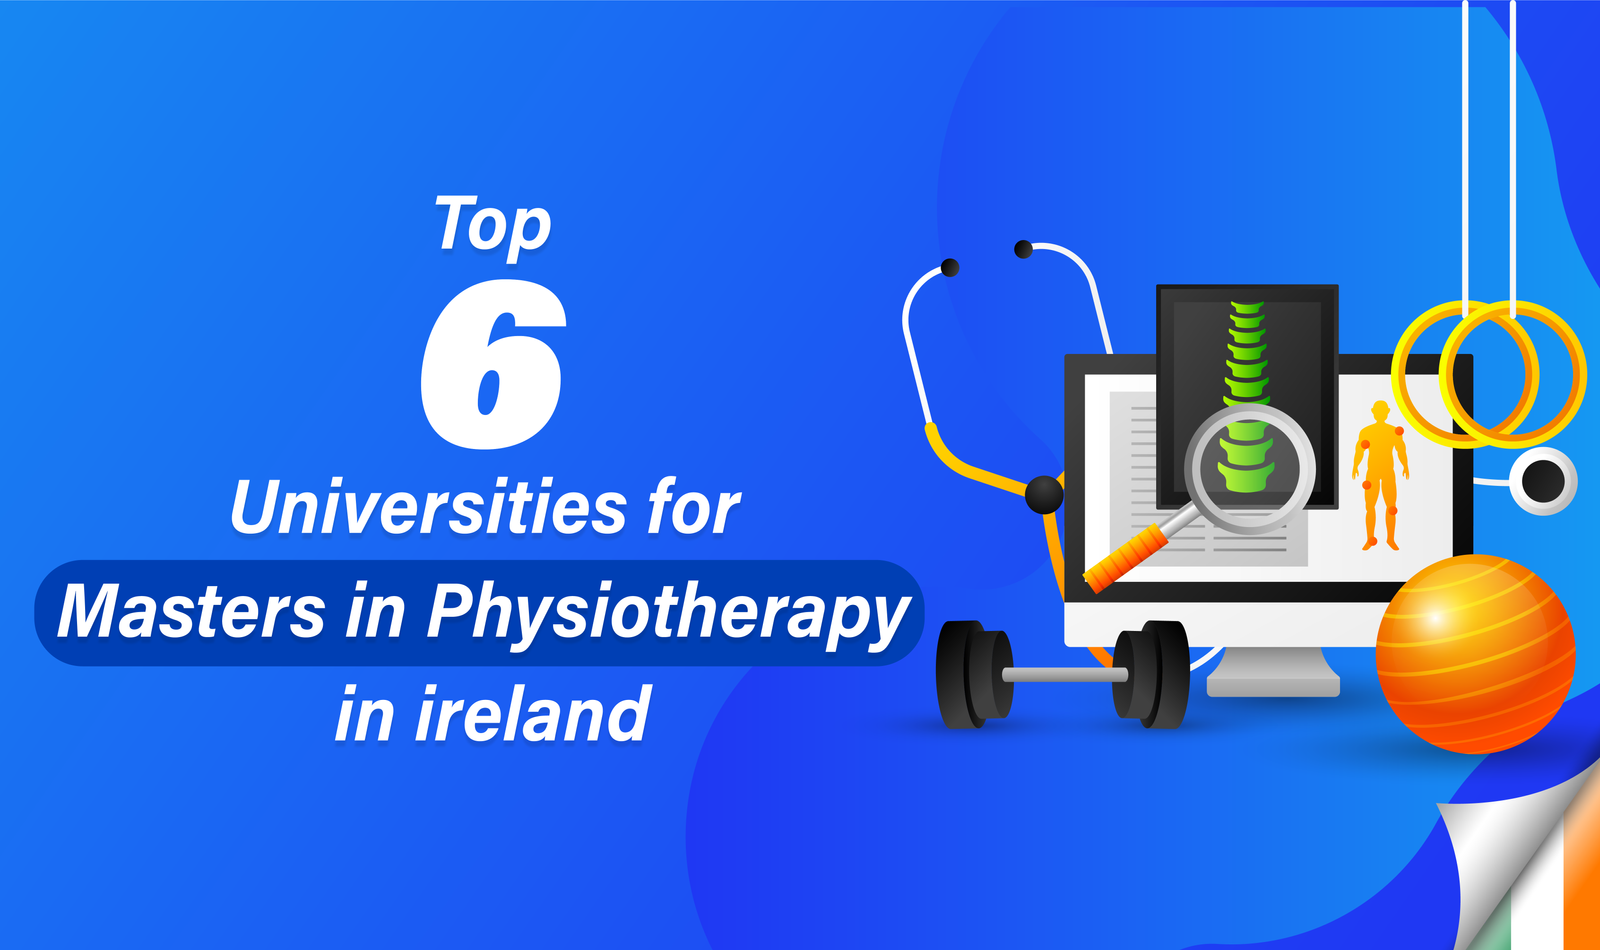 Top 6 Universities for Masters in Physiotherapy in Ireland